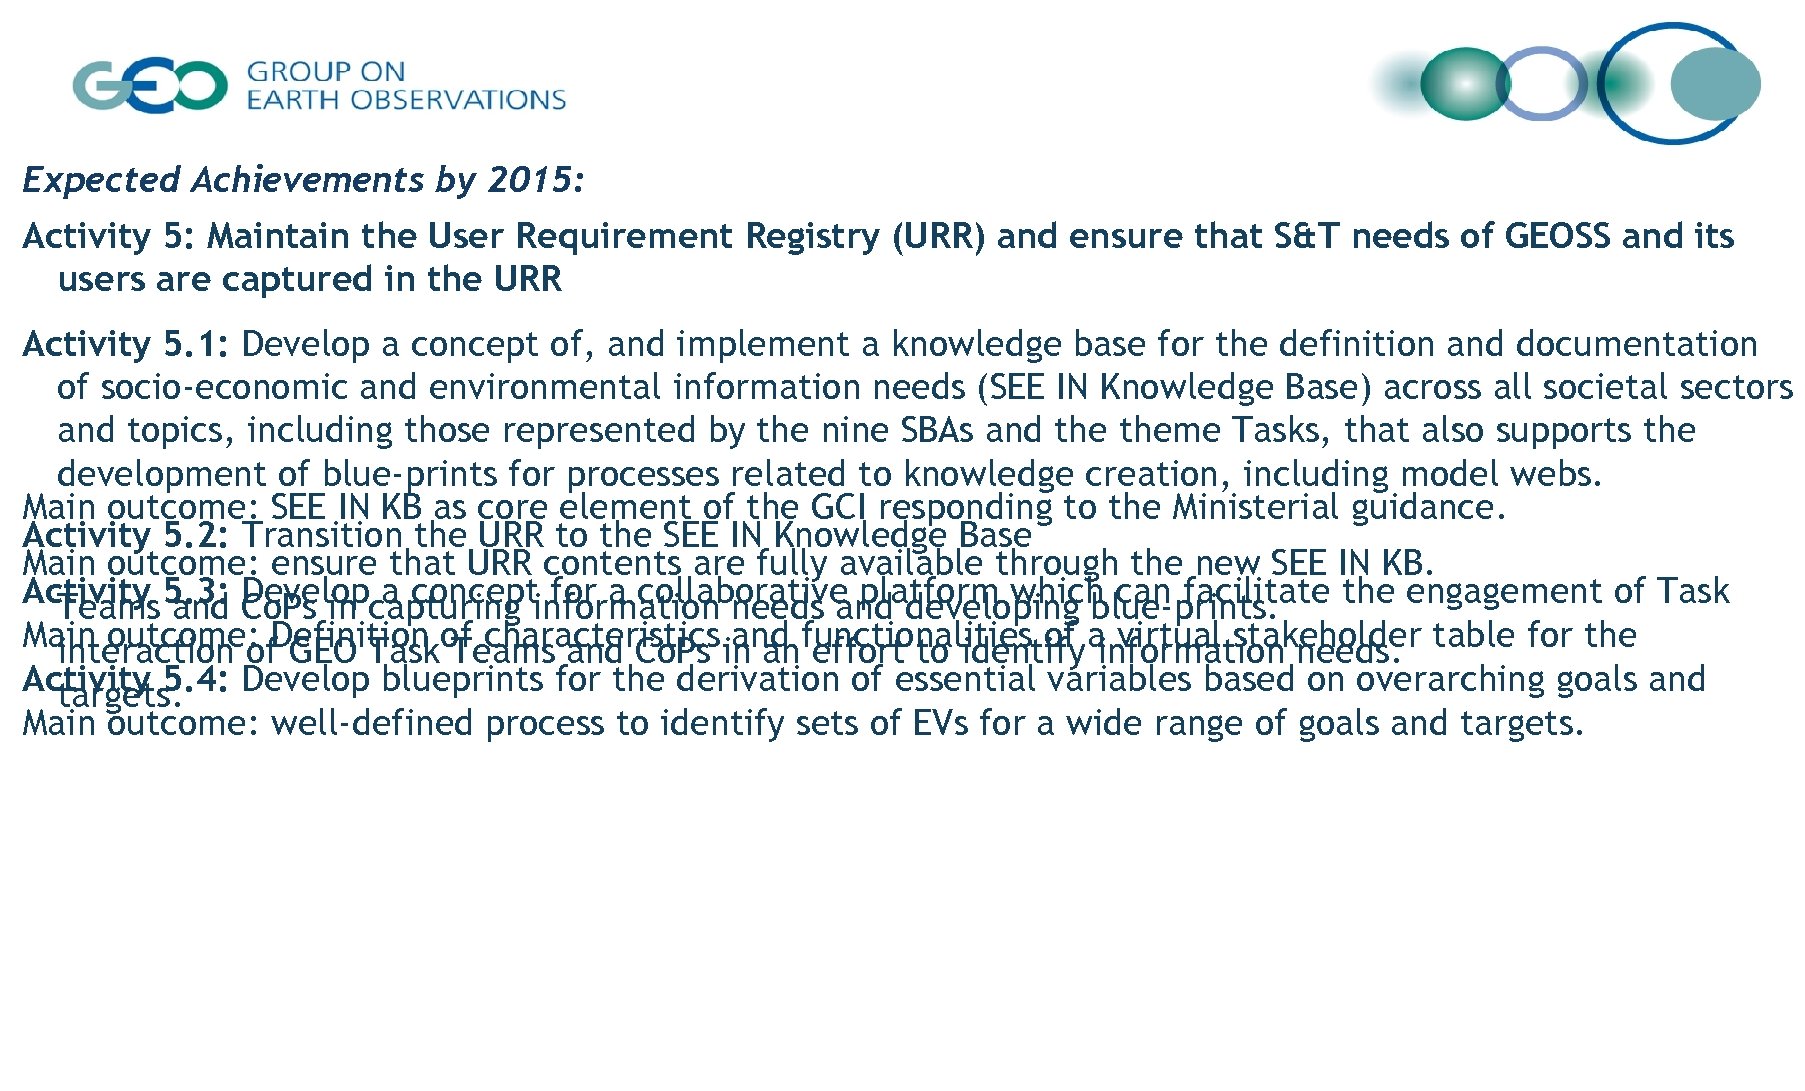 Expected Achievements by 2015: Activity 5: Maintain the User Requirement Registry (URR) and ensure